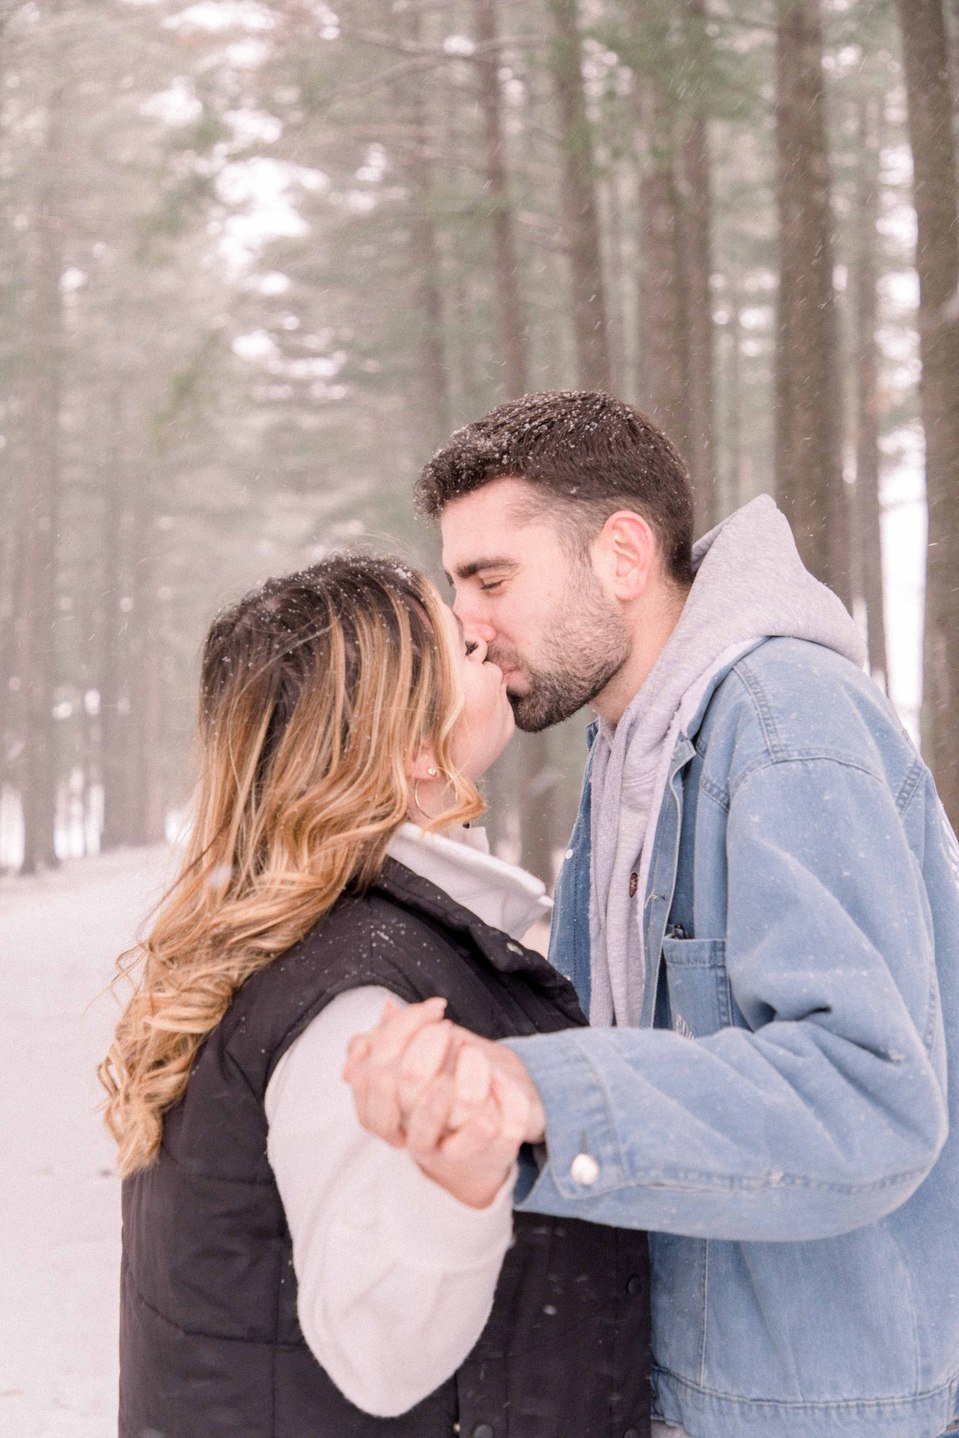 Portrait of young couple holding hands and kissing on a winter trail, Niagara family photographer, family photography, Niagara portrait photographer, portrait photography, Champlain photographer, Hawkesbury photographer, Emily VanderBeek Photography.